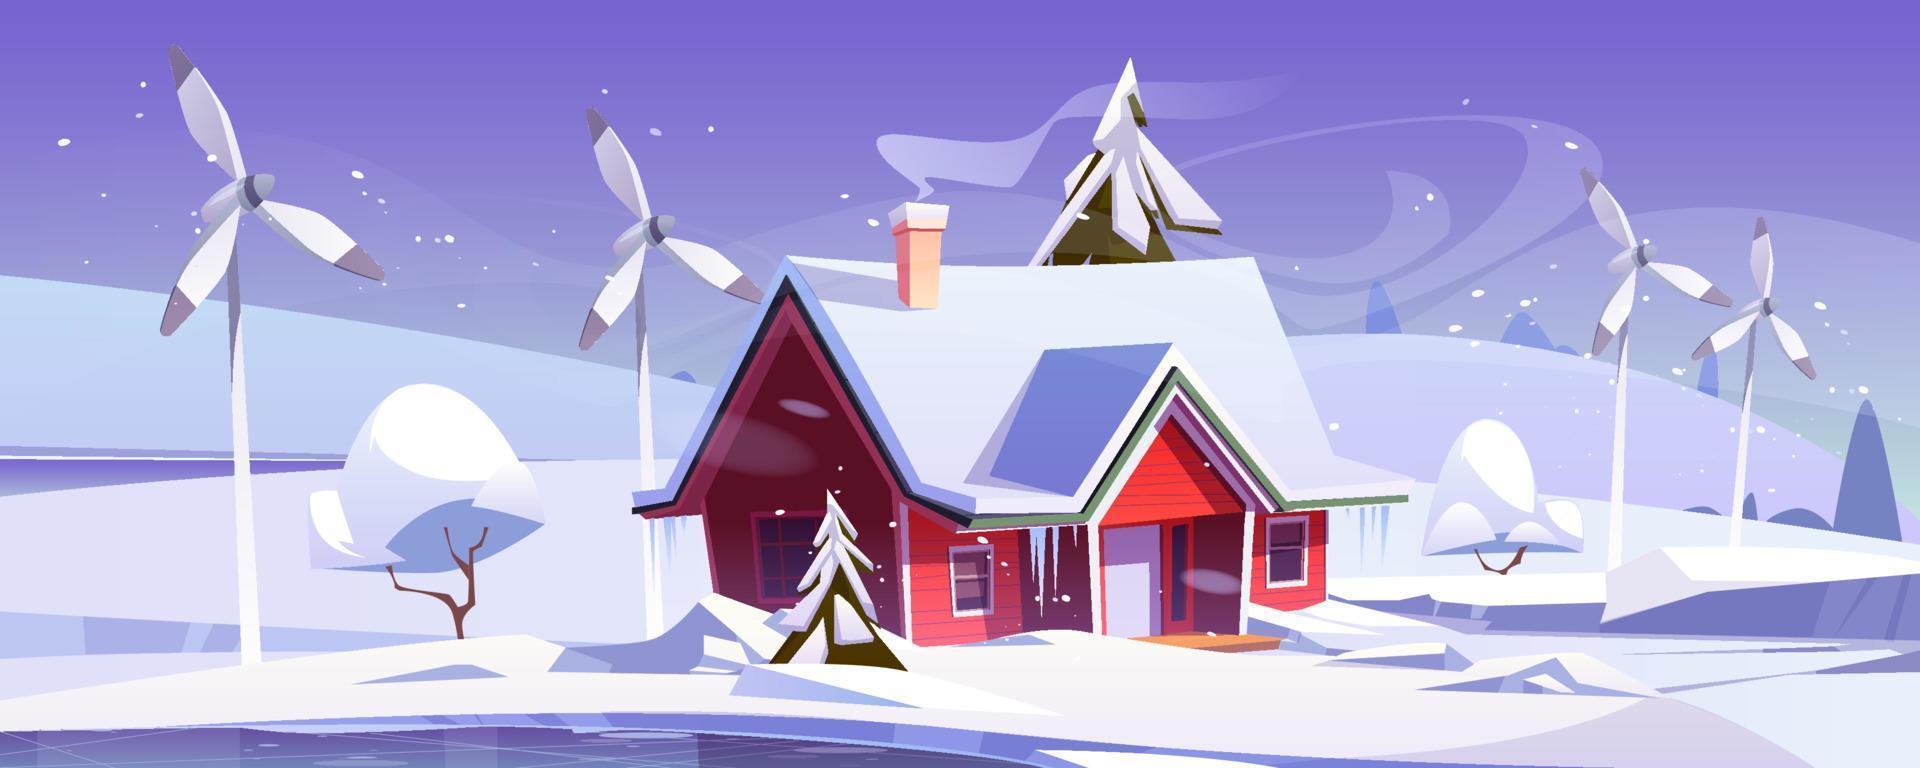 Winter landscape with house and wind turbines vector